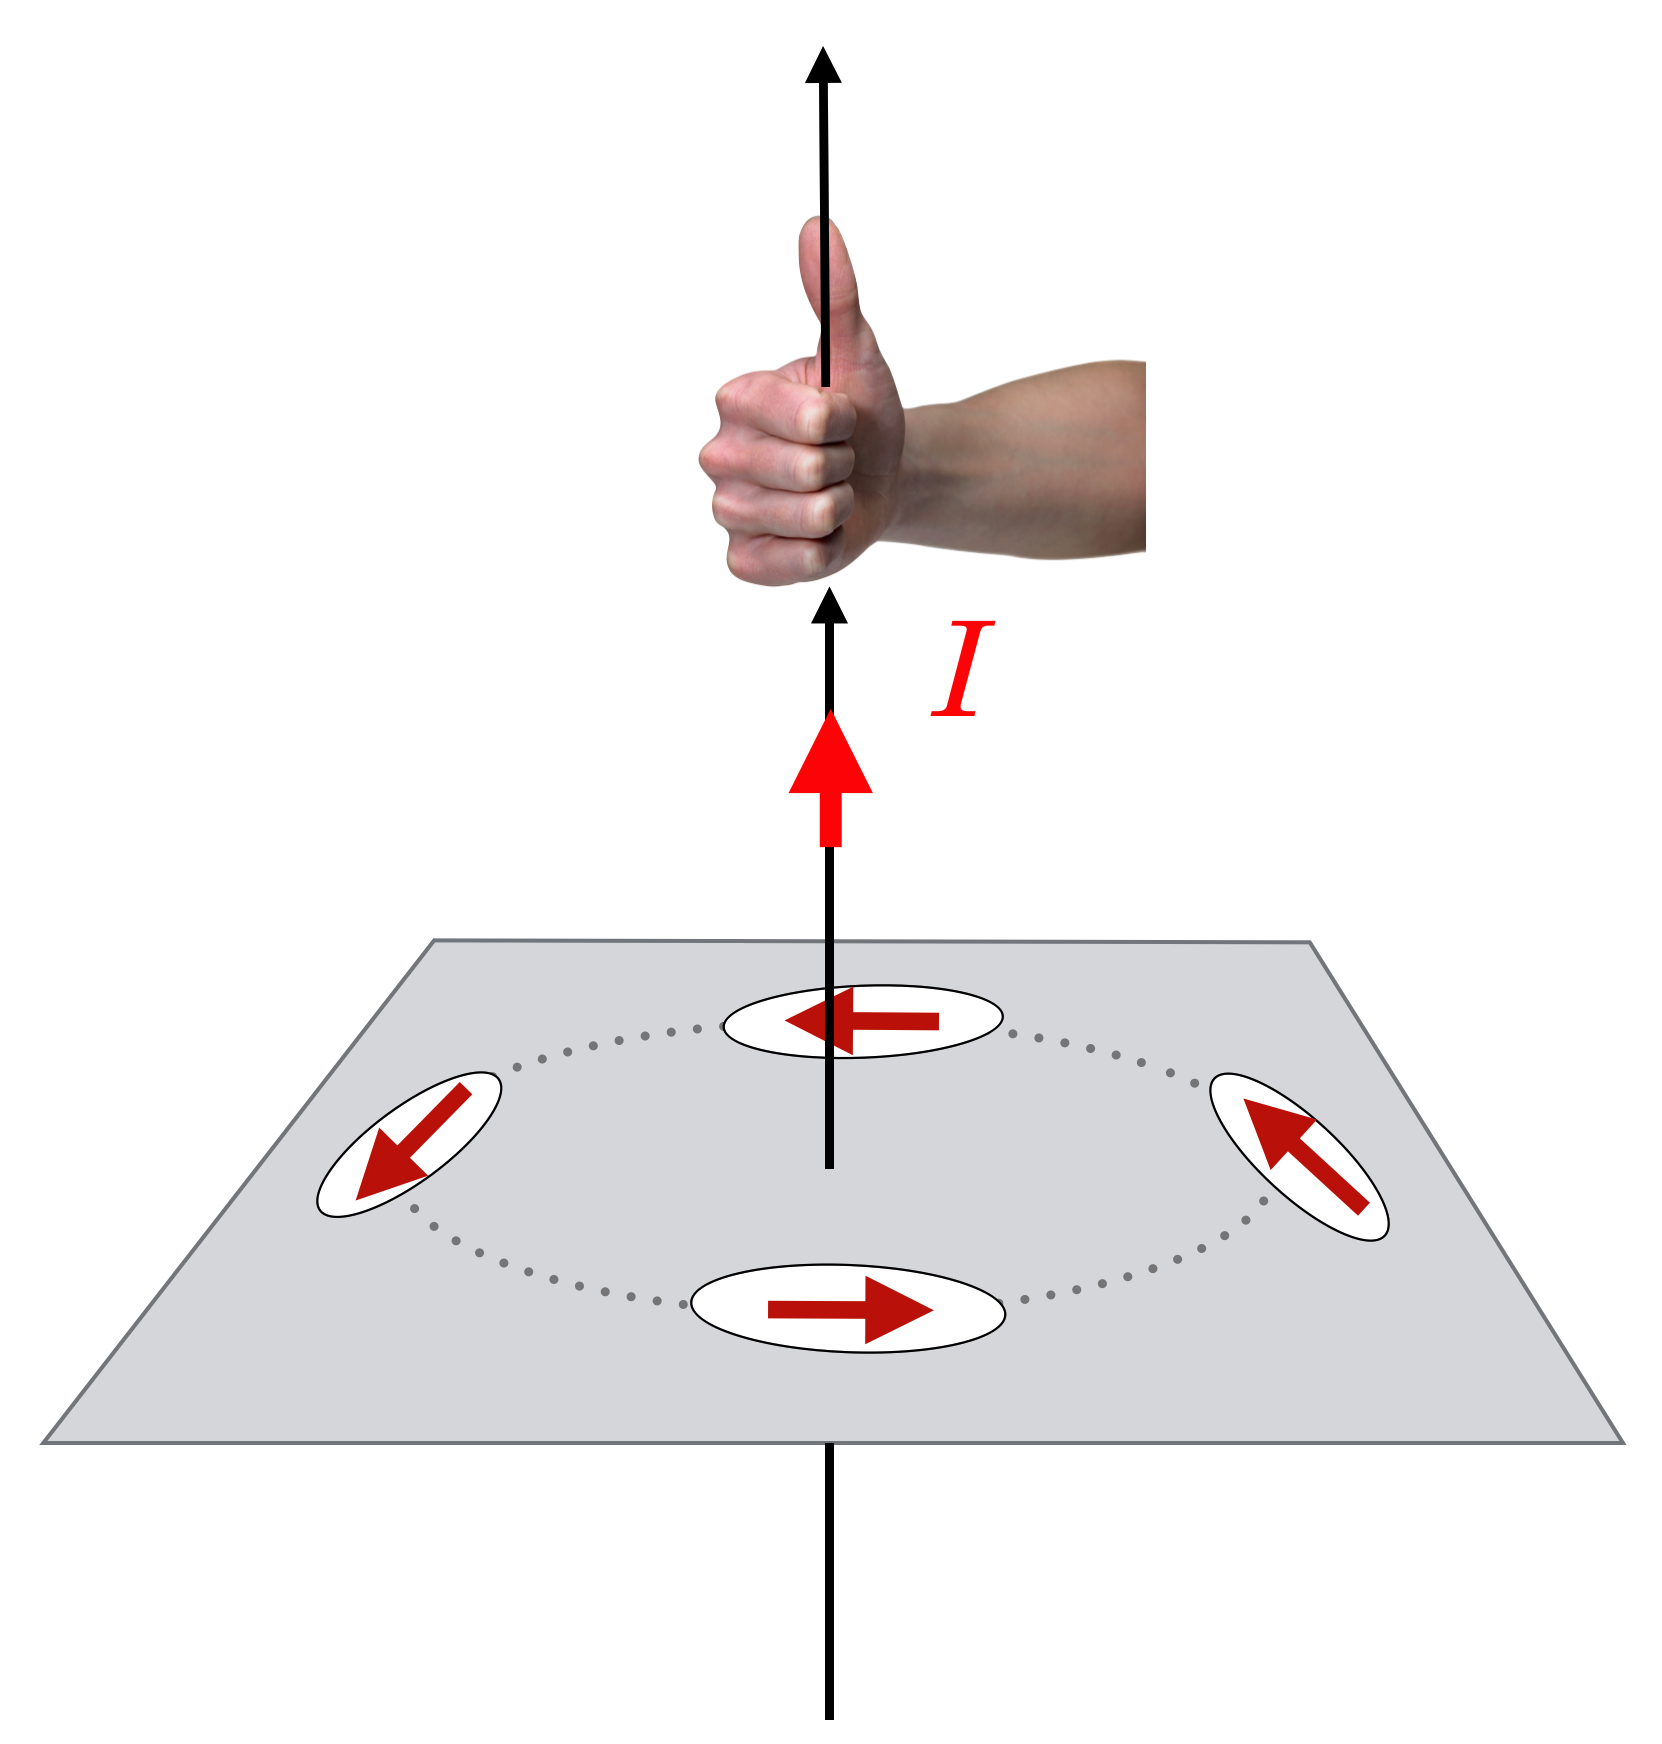 Oersted’s very careful experimentation demonstrated that a compass needle responds in a circular pattern around a wire carrying current. The direction of the north pole of the compass nee- dle can be found by using one of many “Right Hand Rules.” Here if your thumb points in the direction of the current, then your fingers curl around the wire and point in the direction of the north pole of the compass, which is shown by the red arrows. We'll reinterpret this in terms of the Magnetic Field in the next chapter.